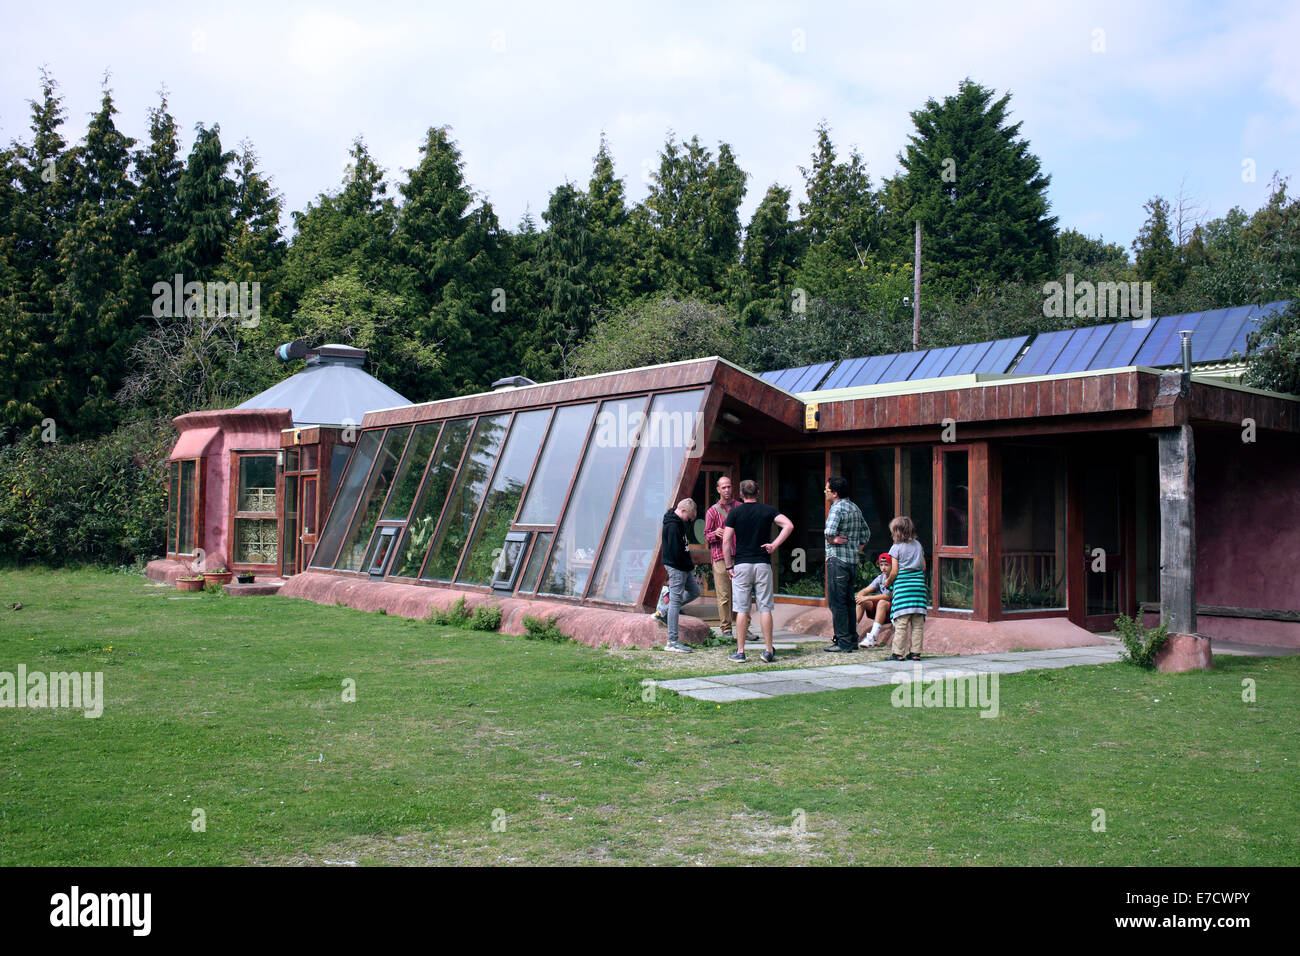 Le Brighton Earthship, Stanmer, Brighton. Banque D'Images